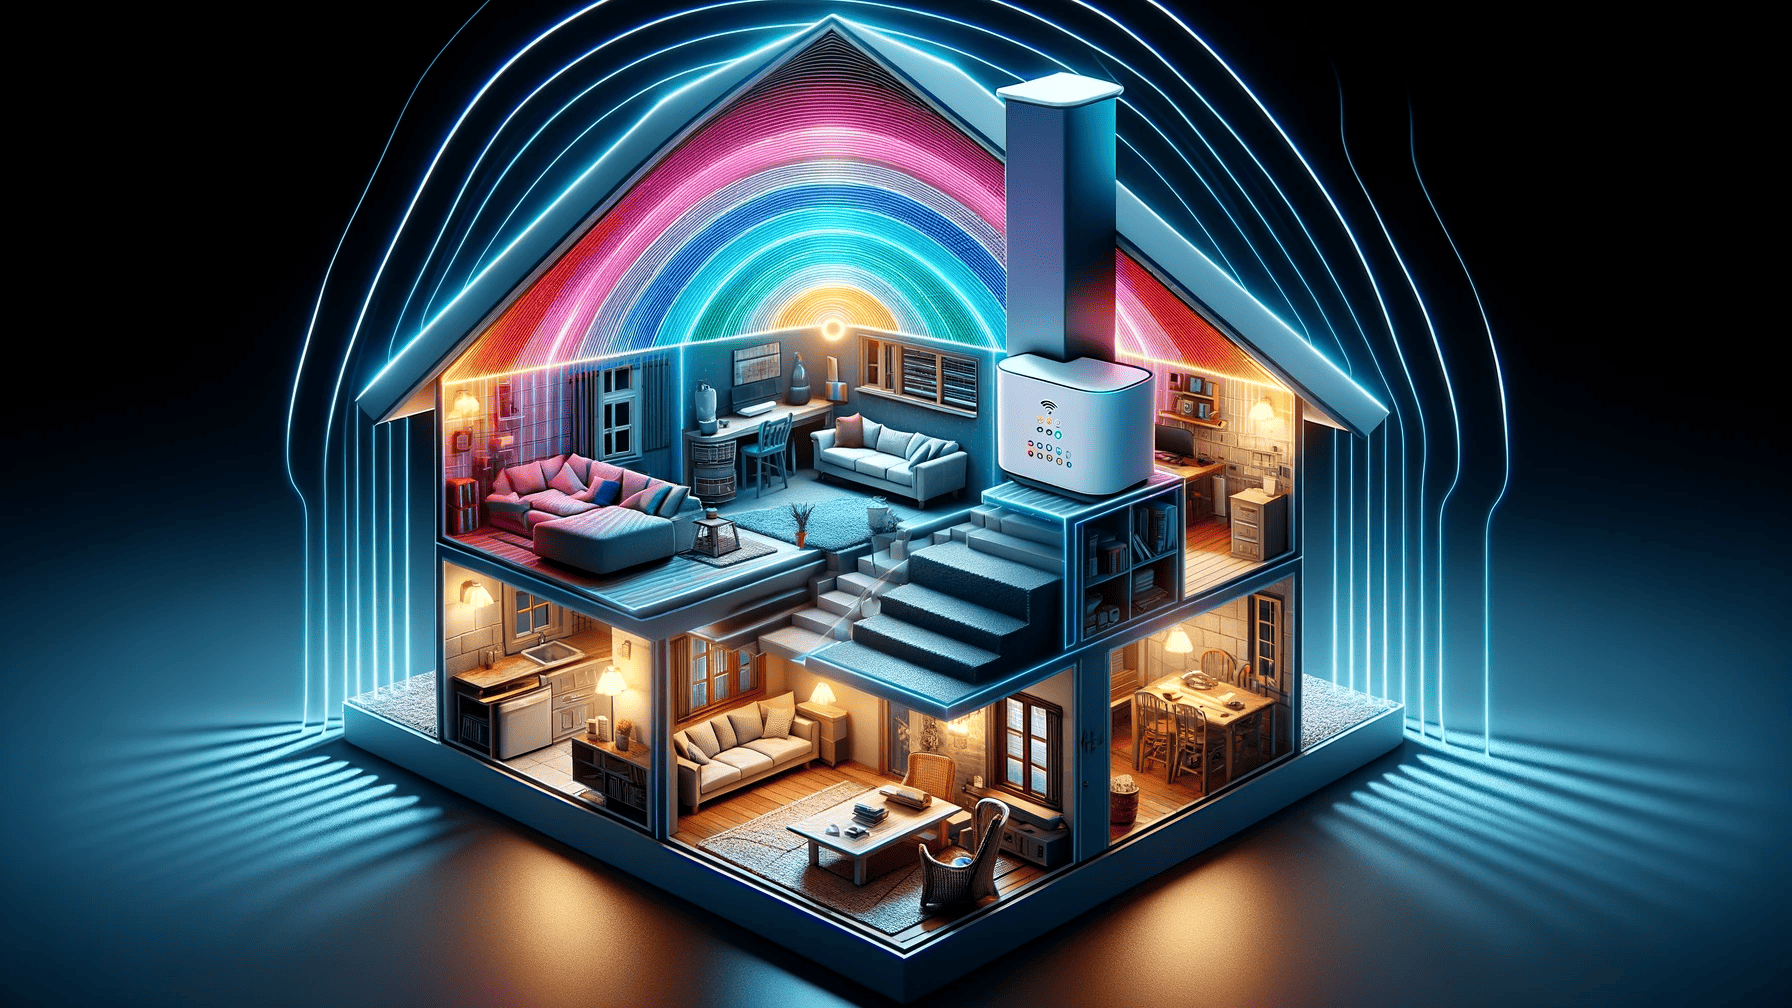 Stylistic cutaway image of a house showing its Wi-Fi signals